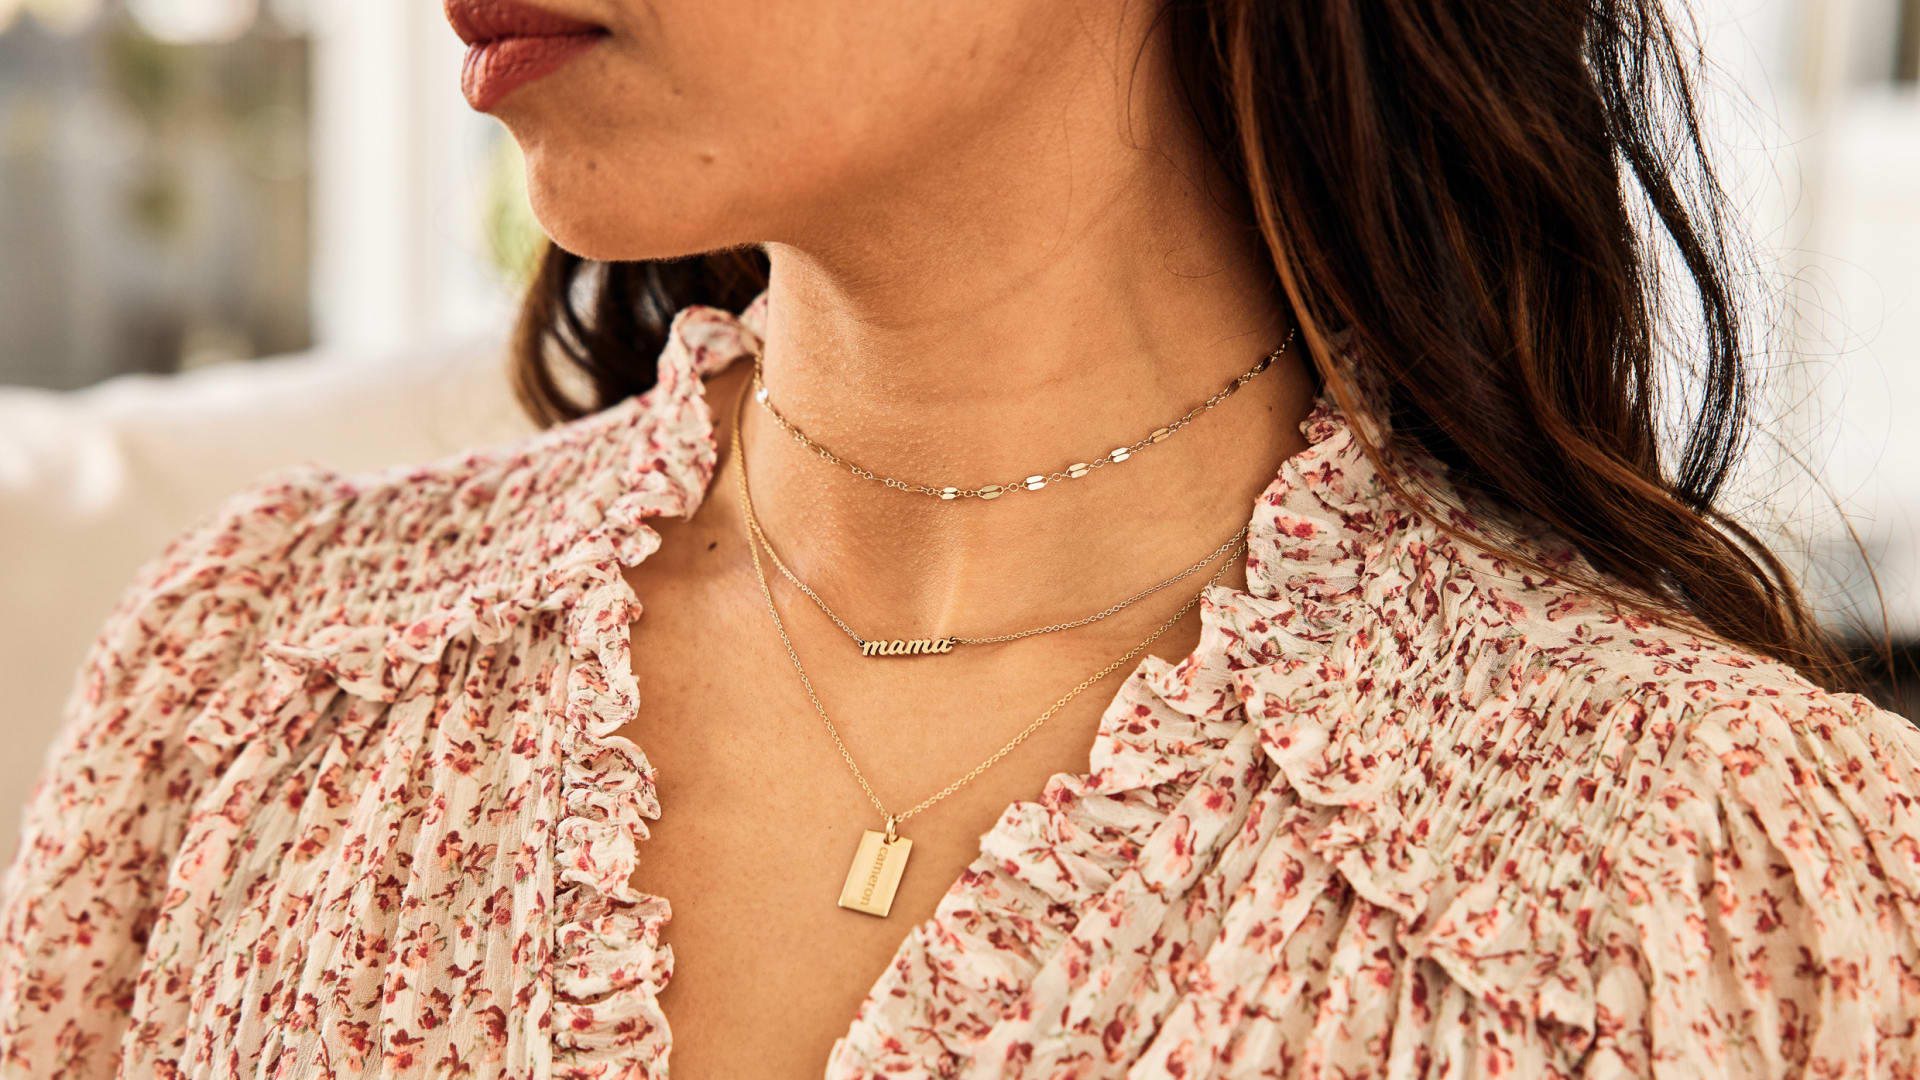 How nameplate necklaces came to rule Mother’s Day